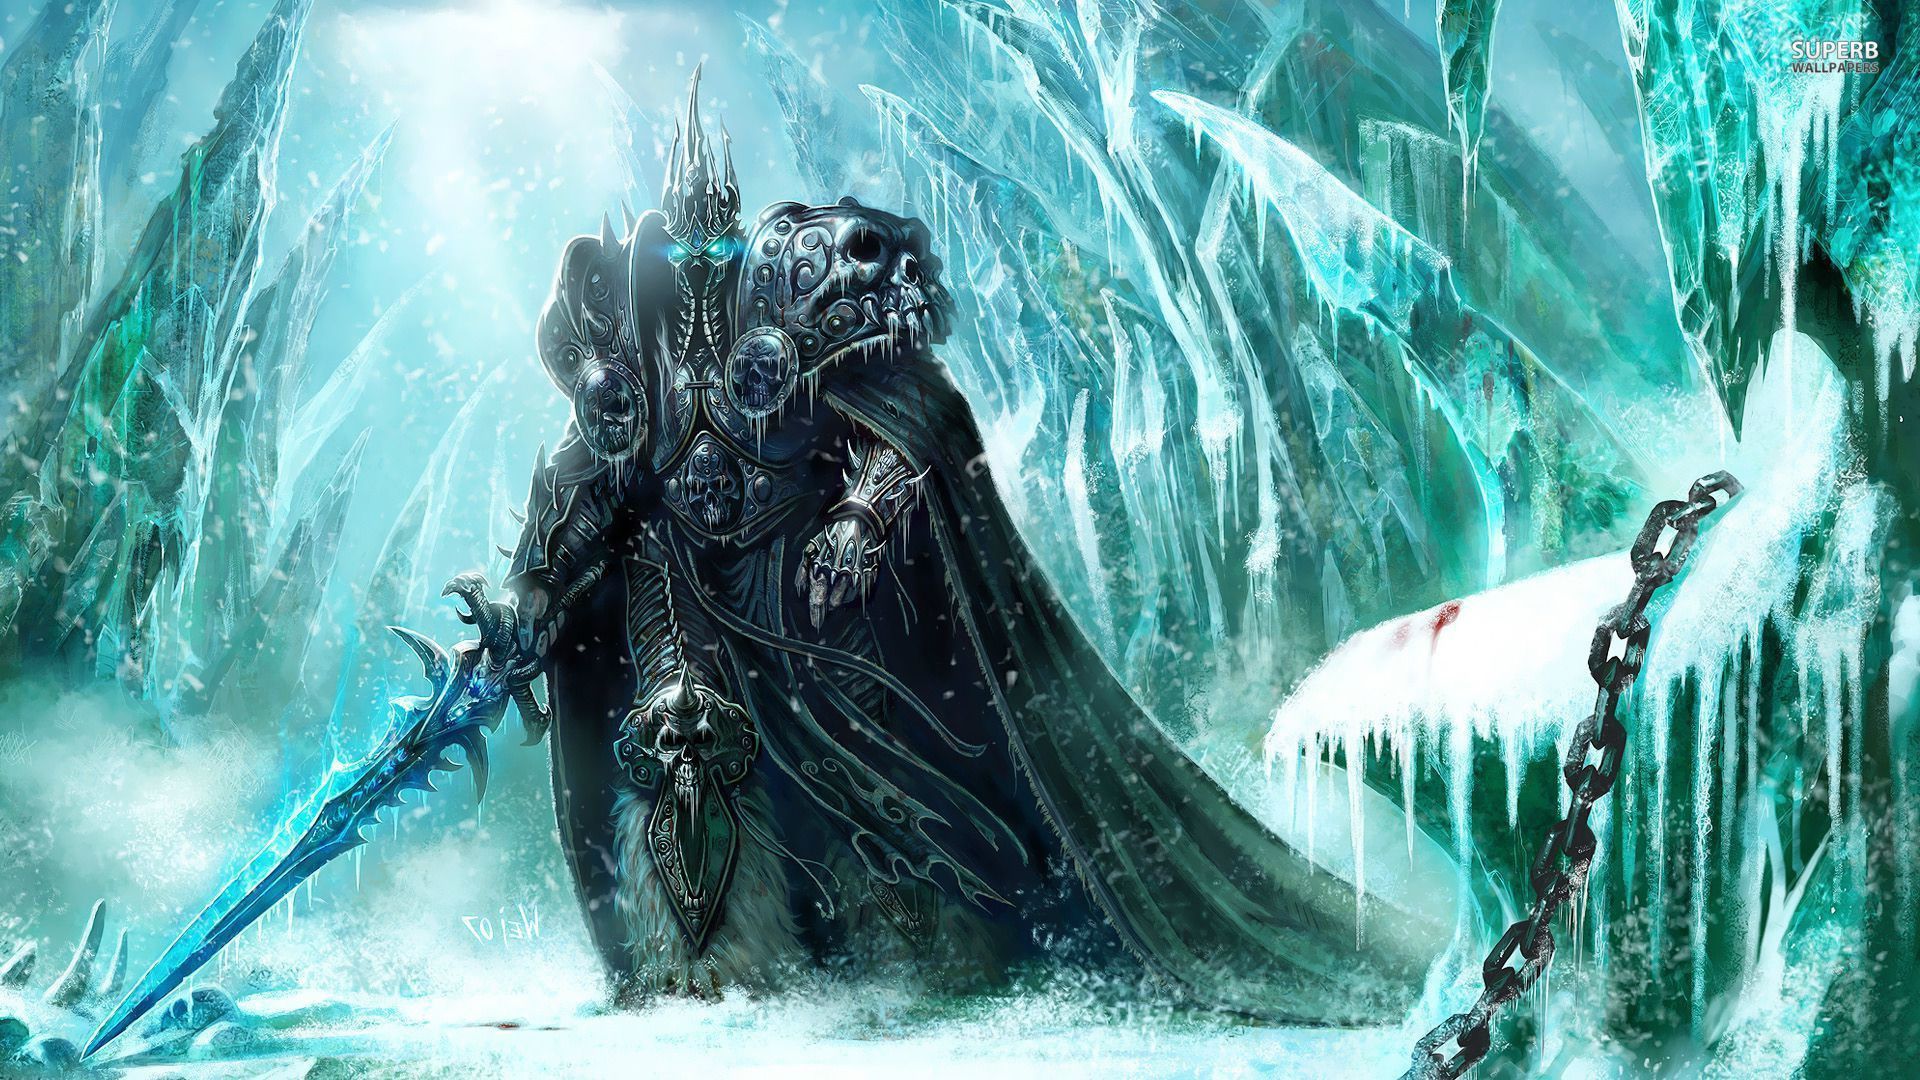 World of Warcraft Wrath of the Lich King wallpaper - Game